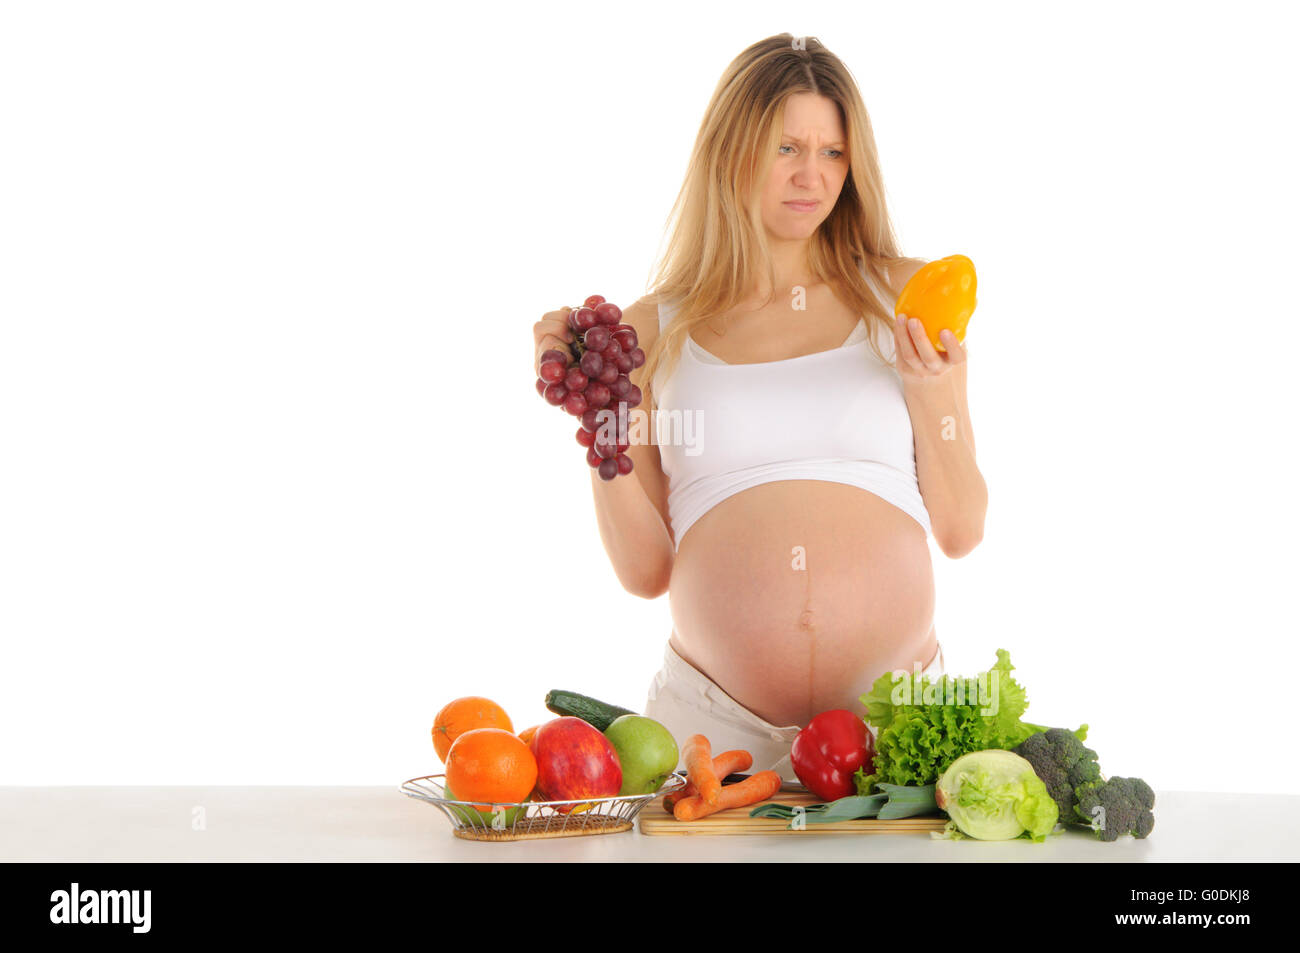 Unhappy pregnant woman with fruits and vegetables Stock Photo